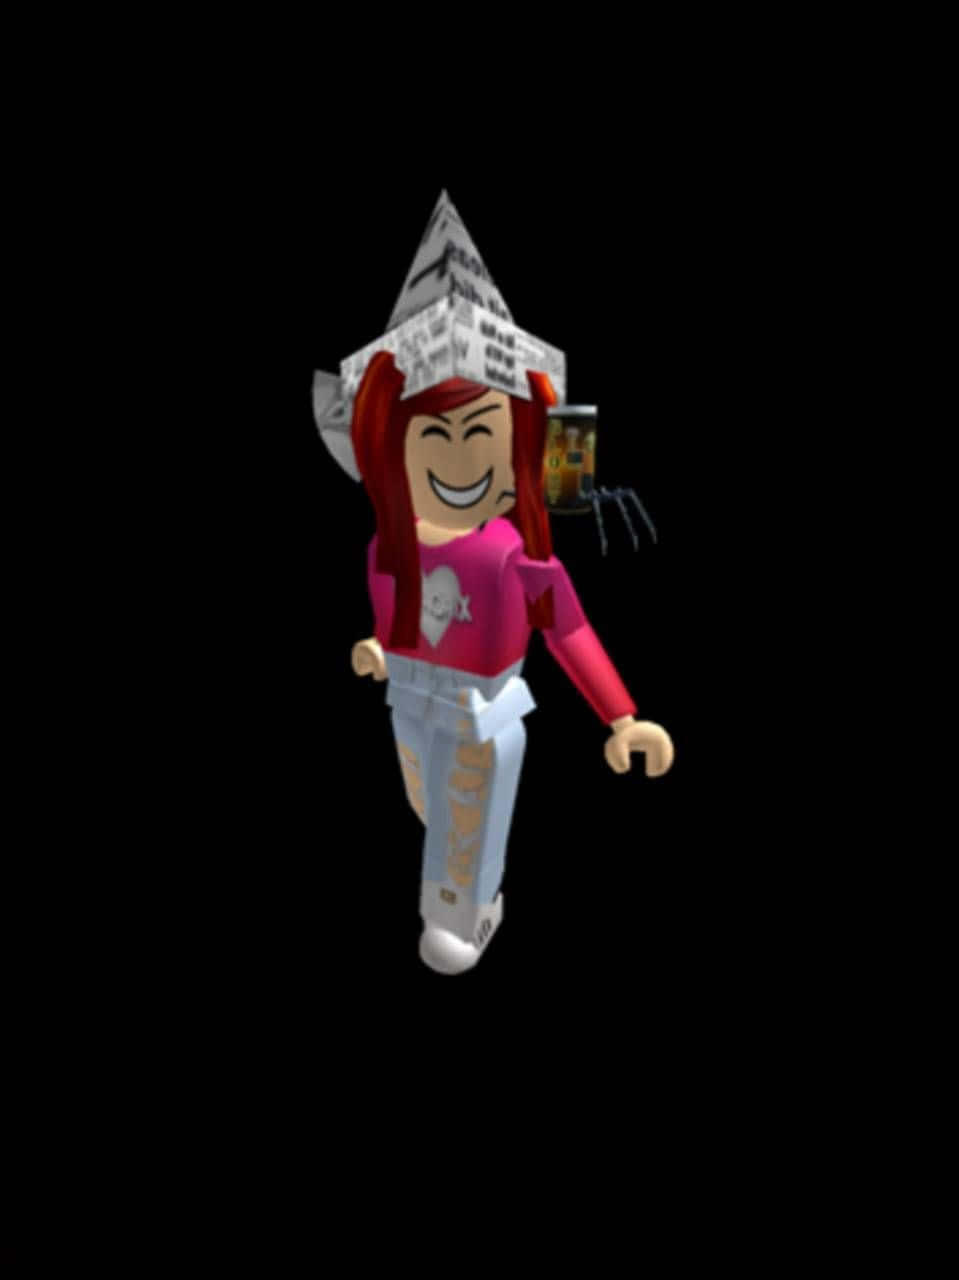 Say hello to the cutest Roblox character!